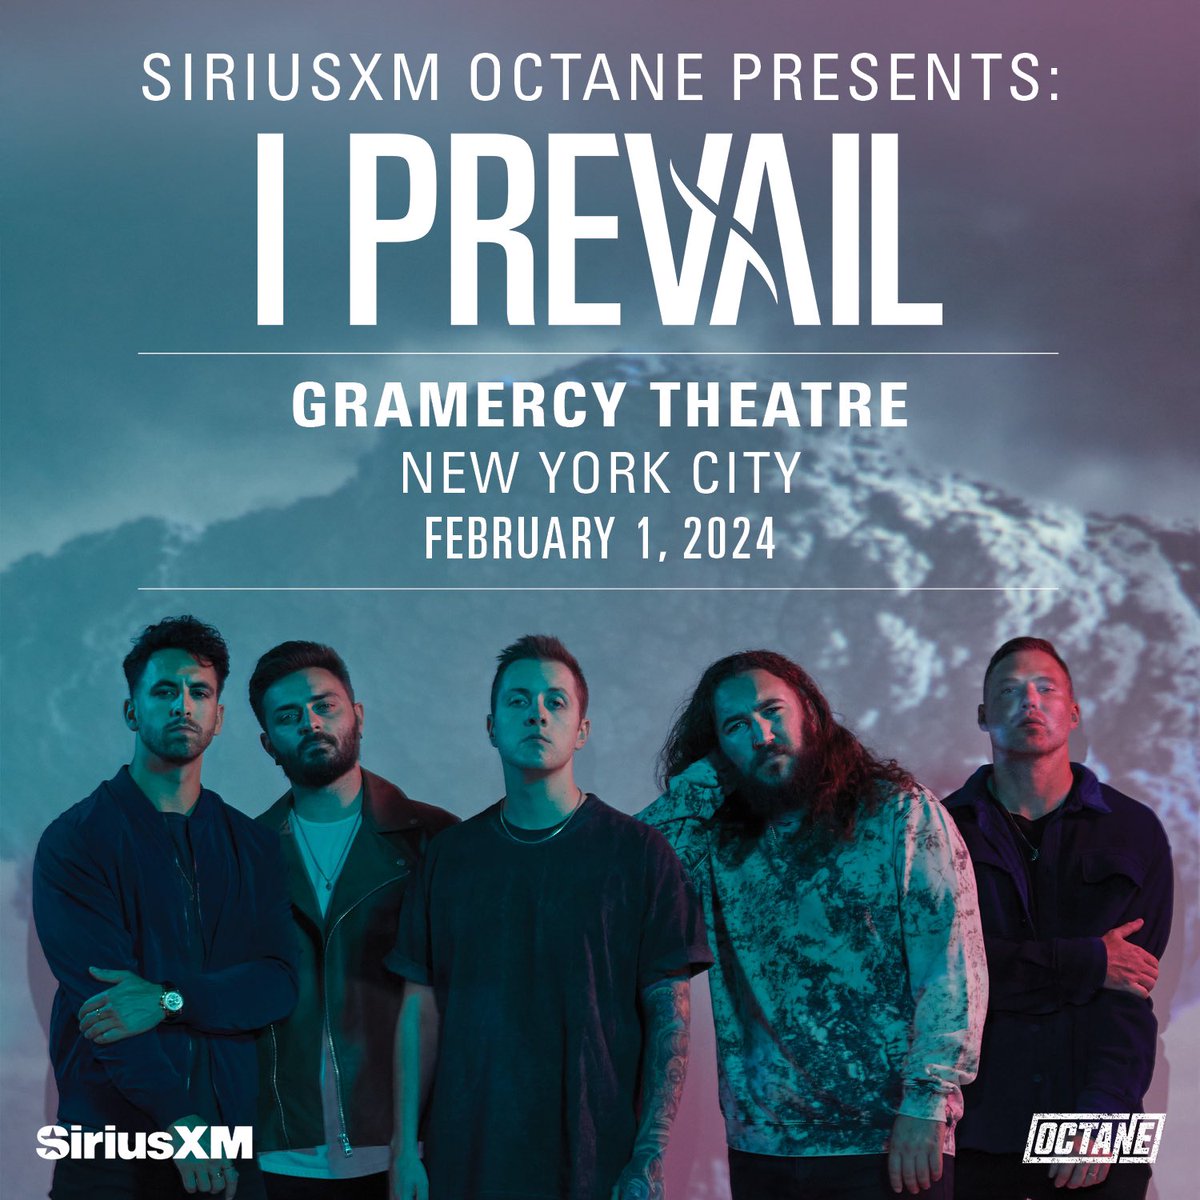 NEW YORK CITY - We’re playing an exclusive, intimate show at the Gramercy Theatre on February 1st presented by @SiriusXMOctane. Tickets available at concerts.livenation.com/i-prevail-new-…